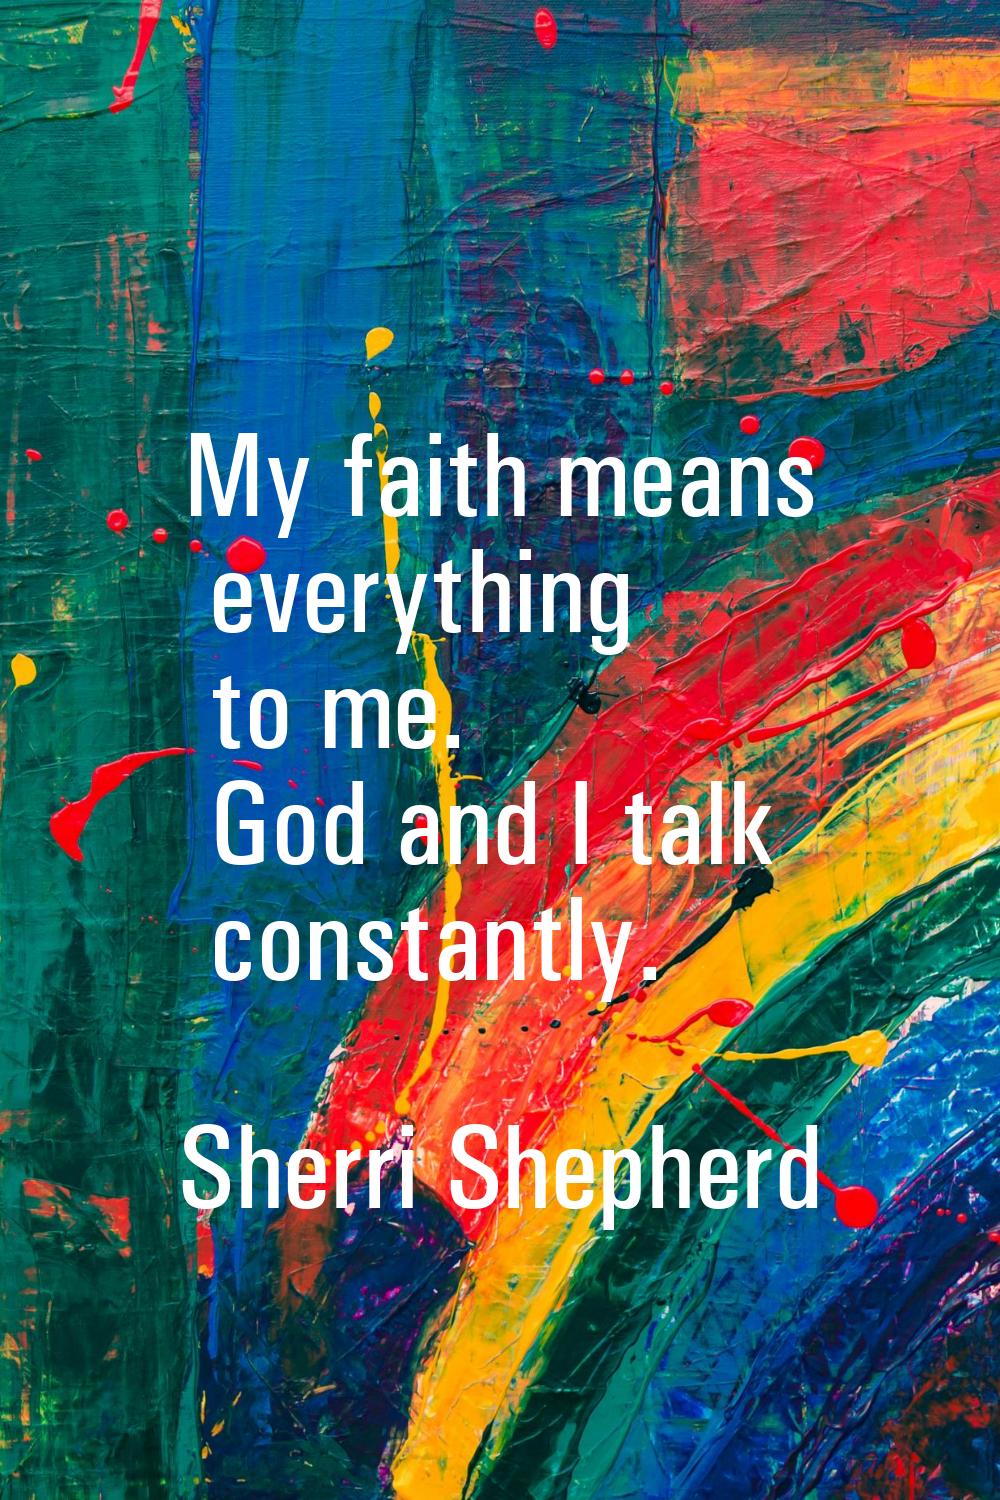 My faith means everything to me. God and I talk constantly.